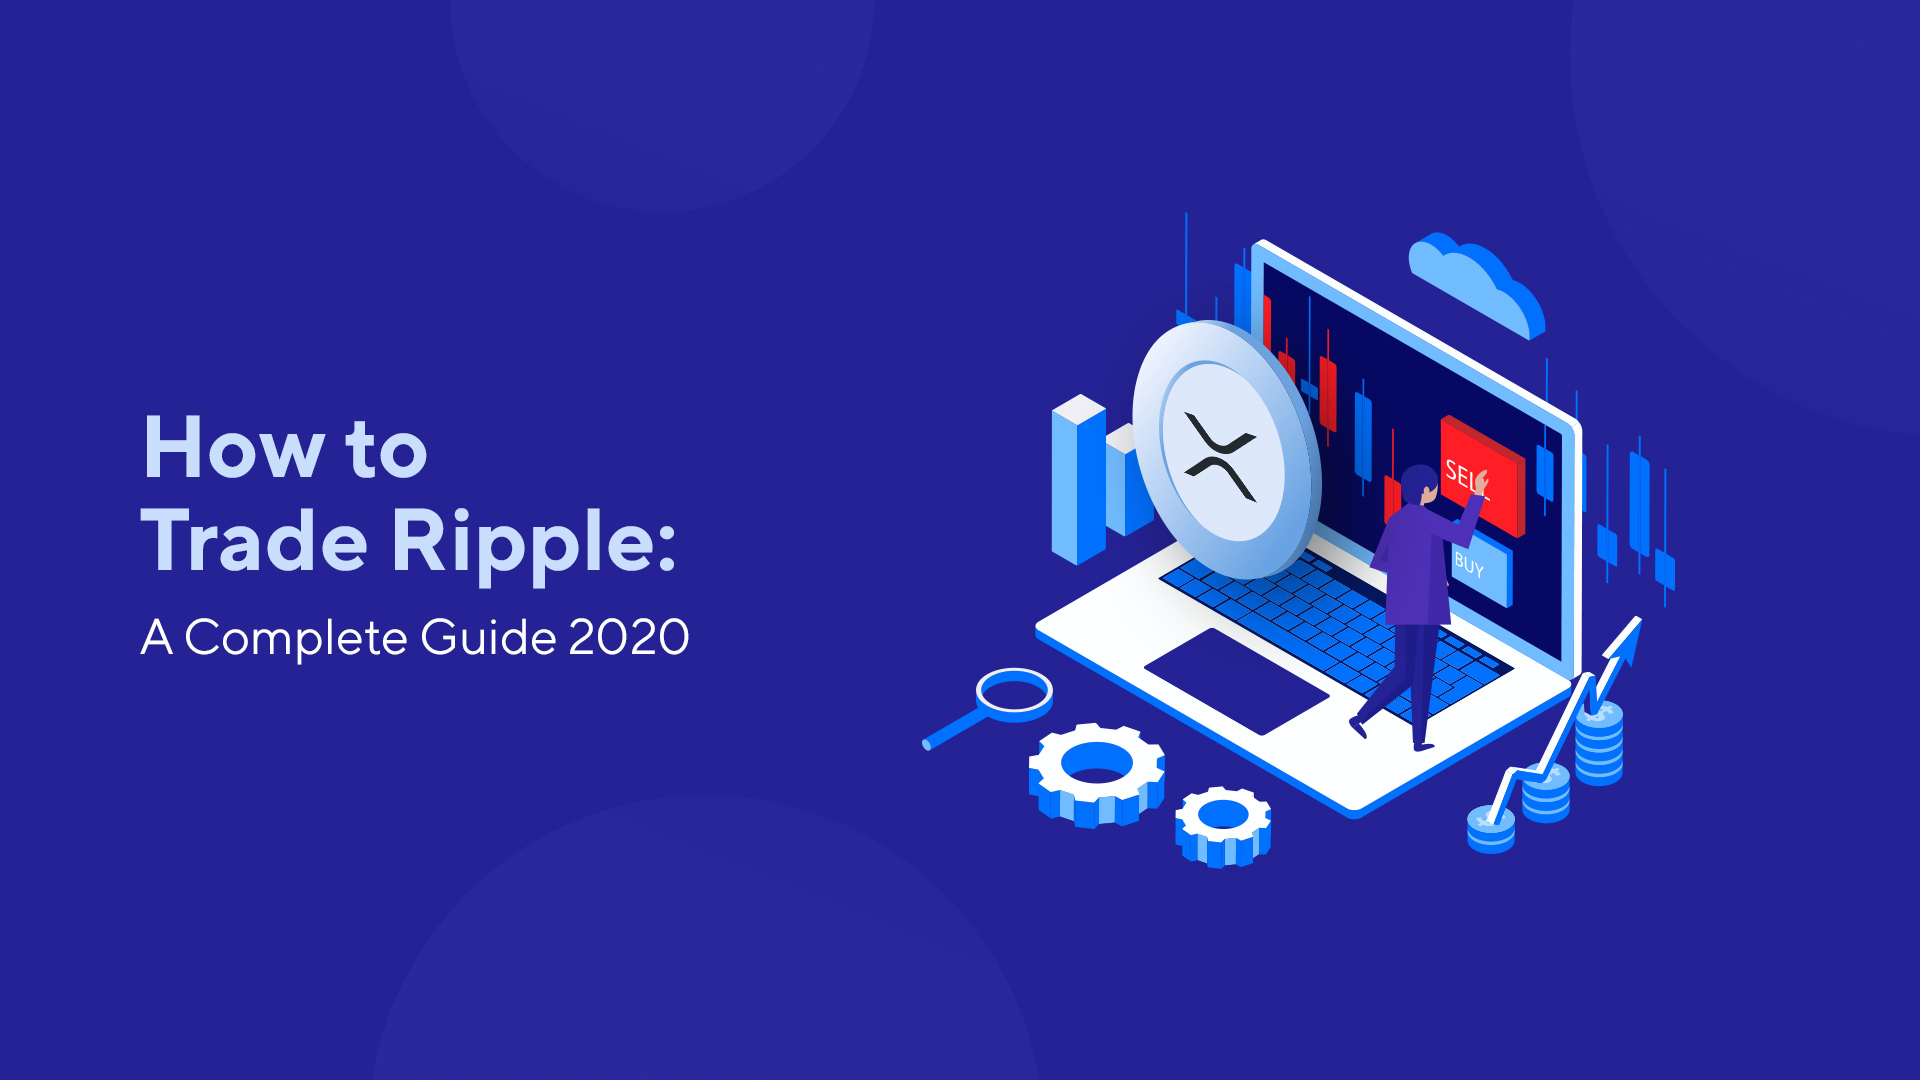 How to Trade Ripple: A Complete Guide 2020